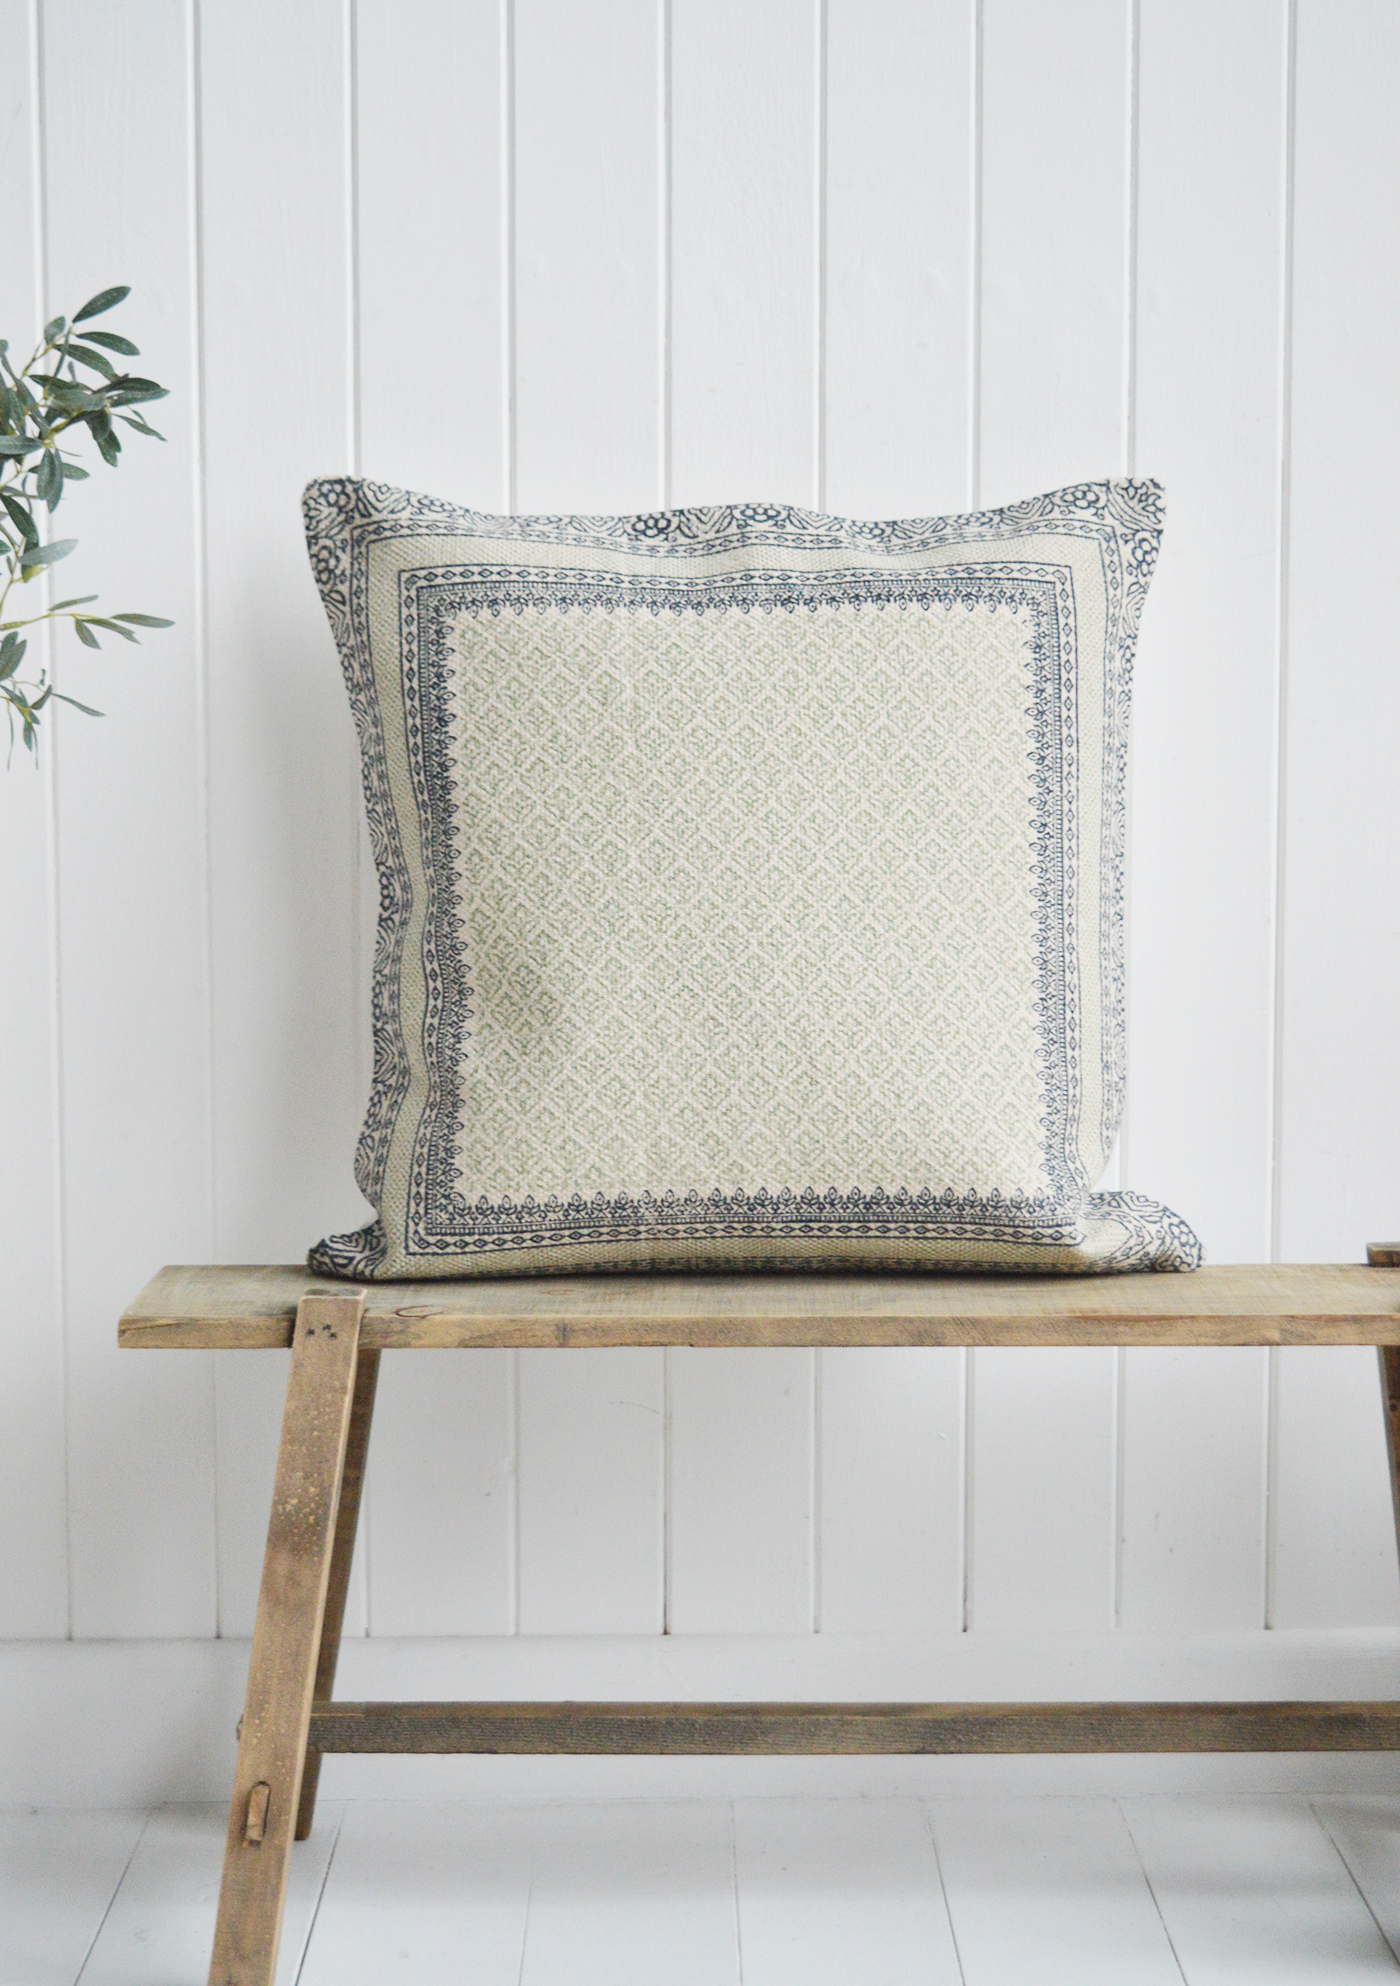 Quincy cushion cover in french grey and navy for New England interiors